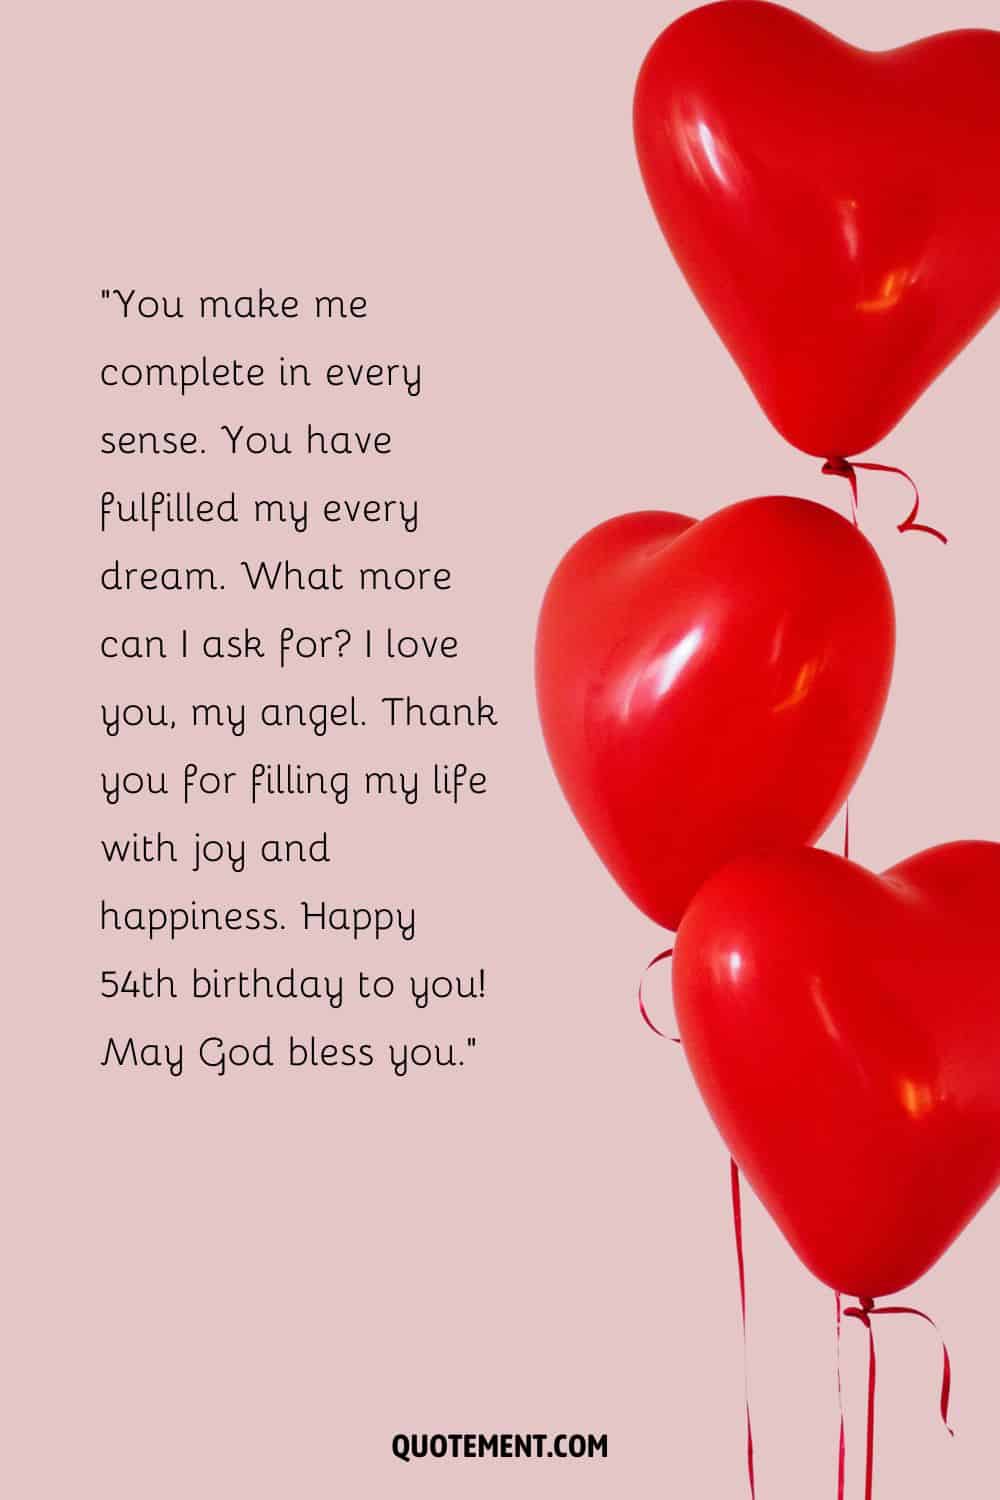 Touching message for your wife's 54th birthday and red, heart-shaped balloons next to it
